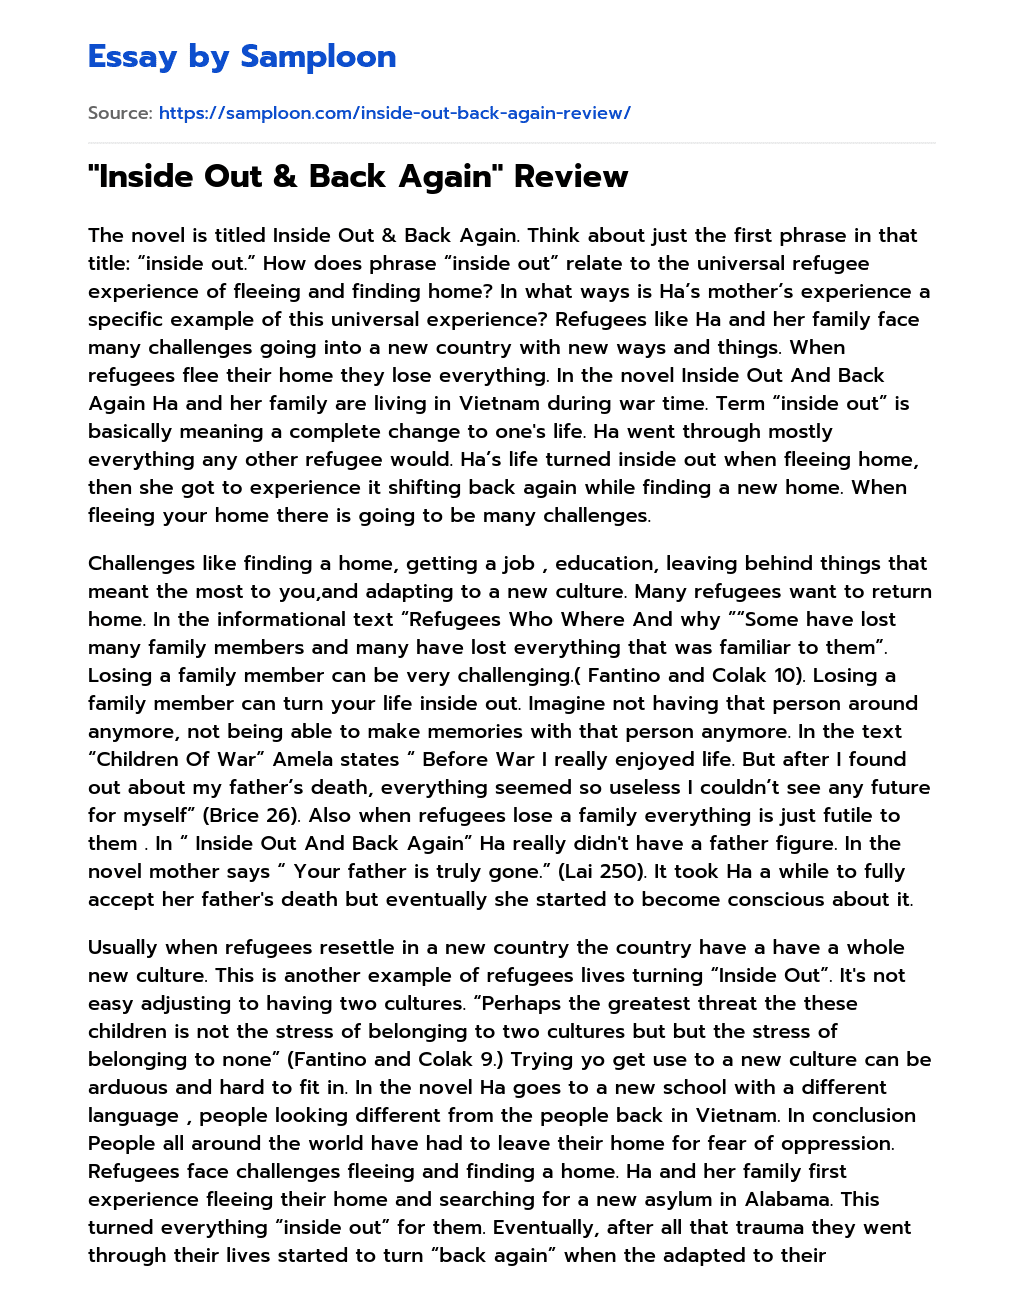 “Inside Out & Back Again” Review essay